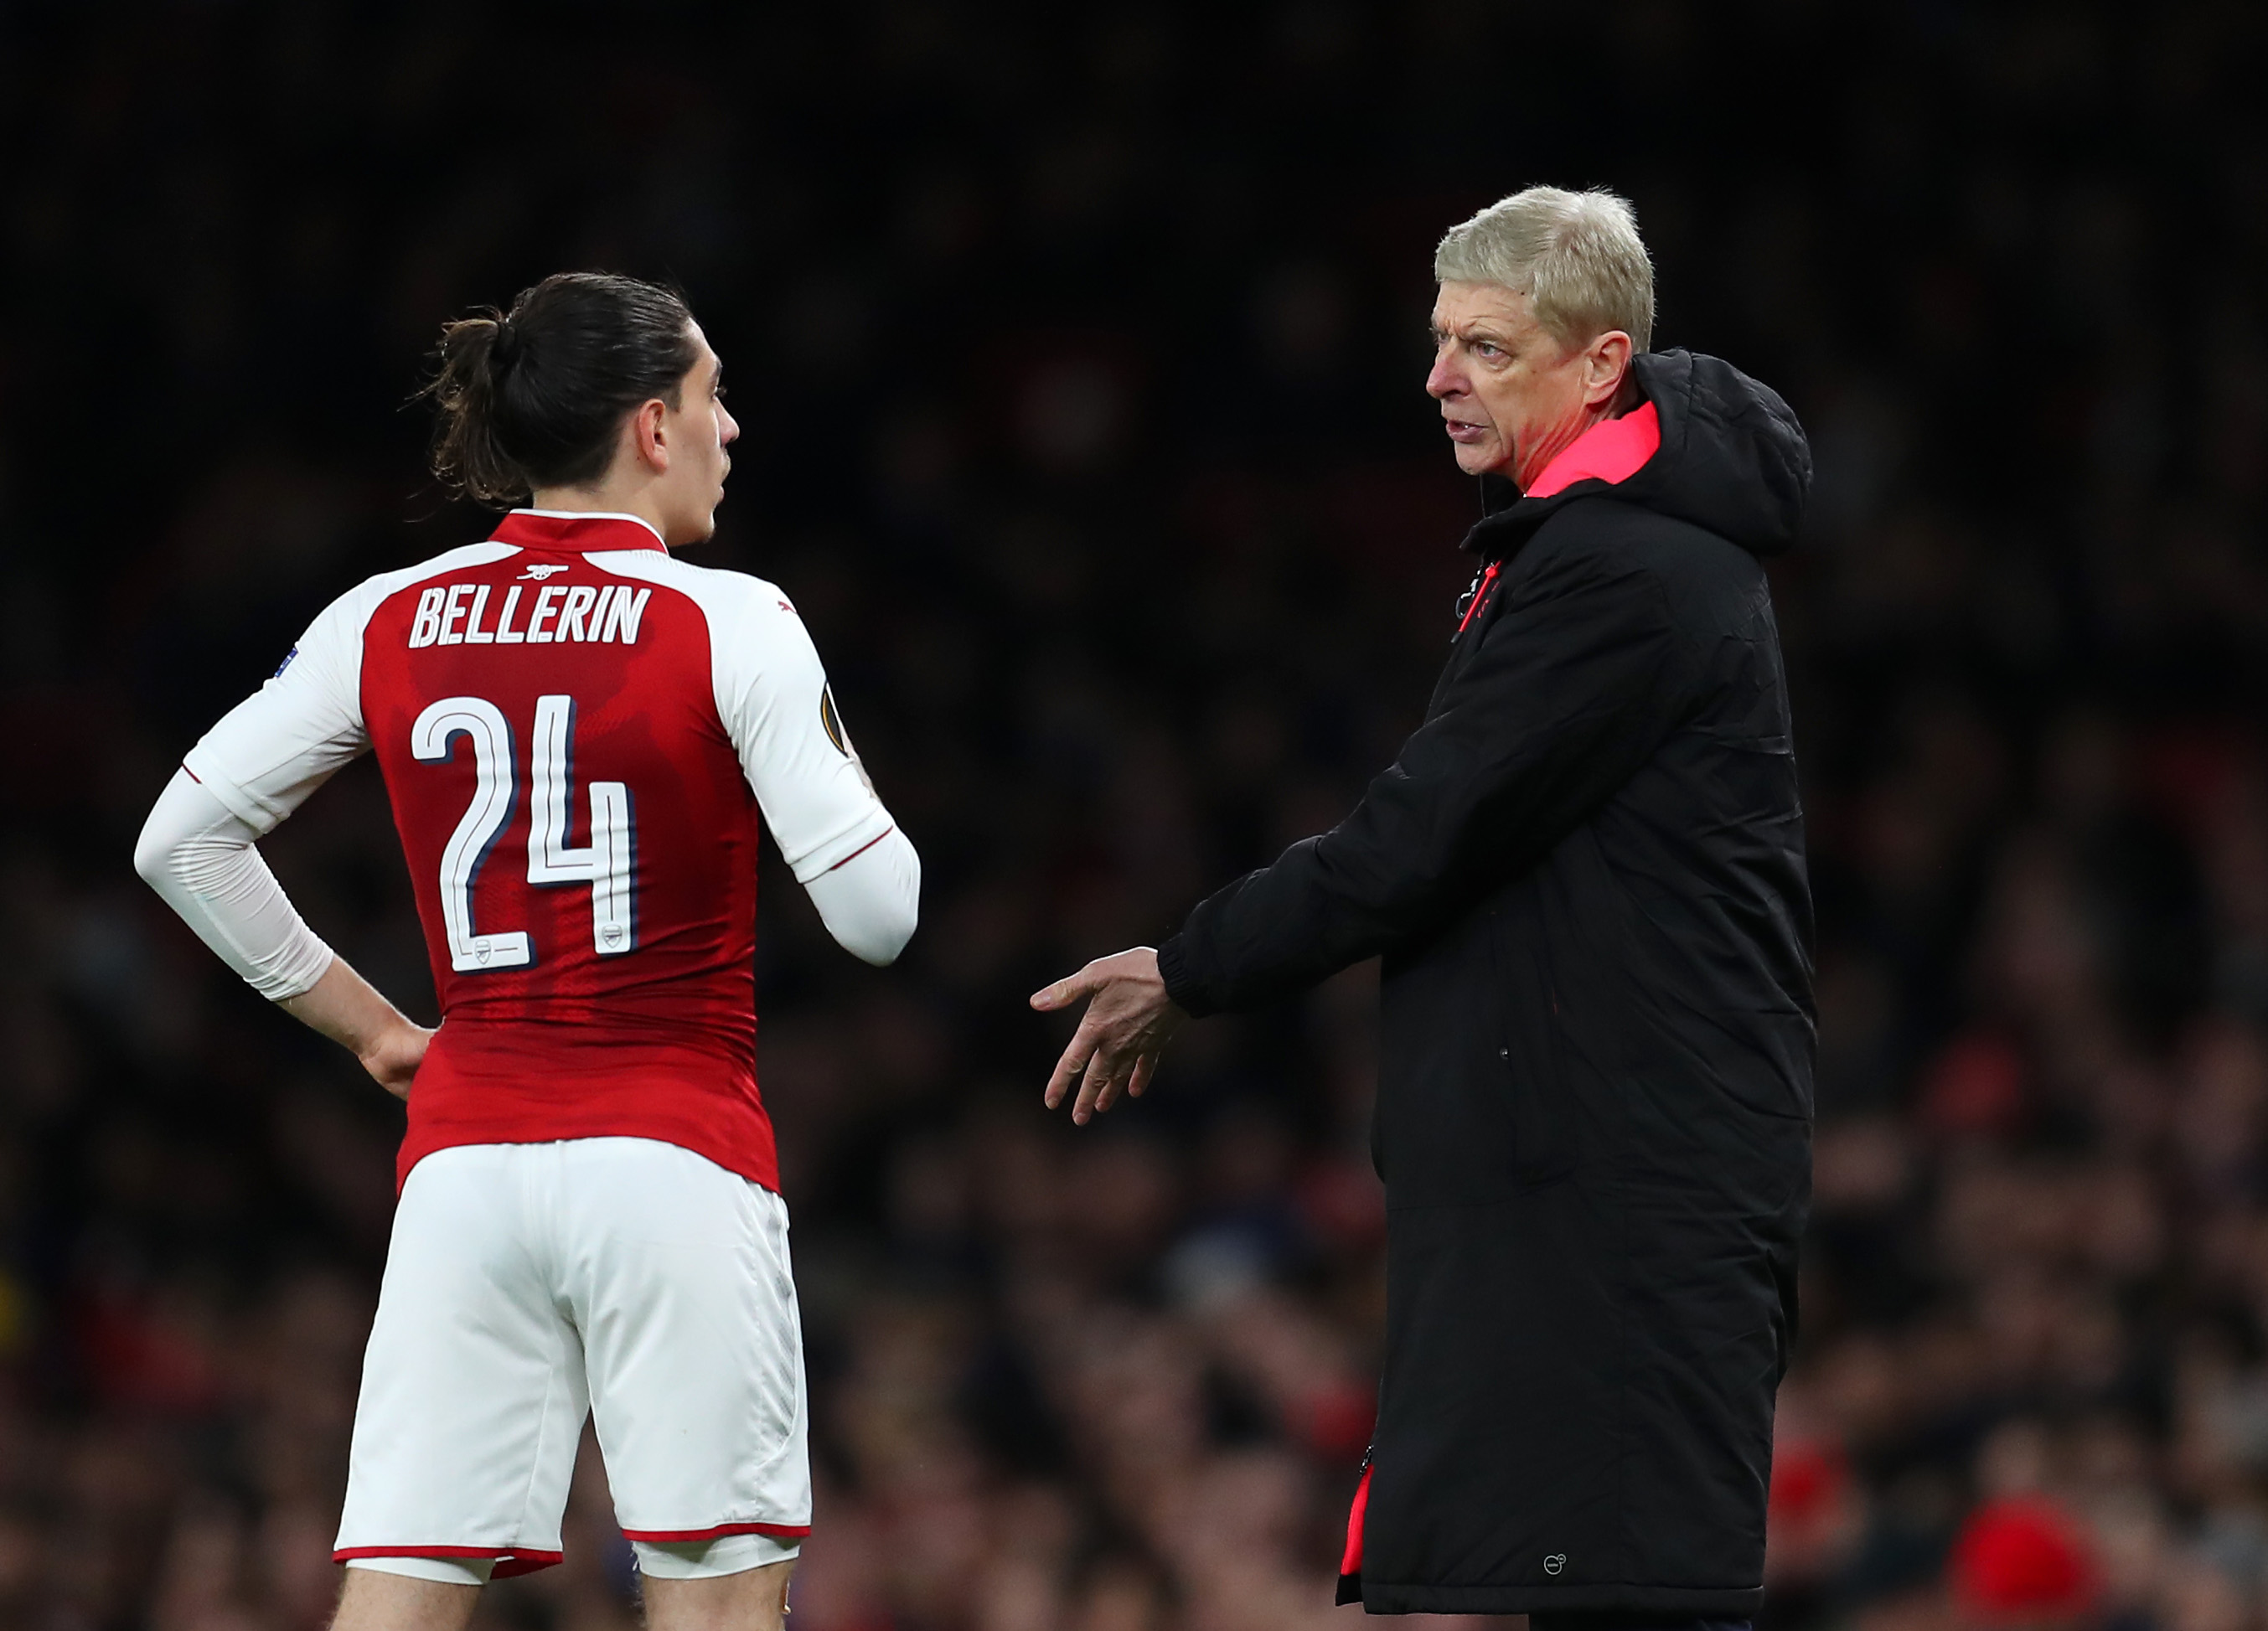 Bellerin is one of the few players in this Arsenal team that were once coached by the legendary Arsene Wenger. (Picture Courtesy - AFP/Getty Images)